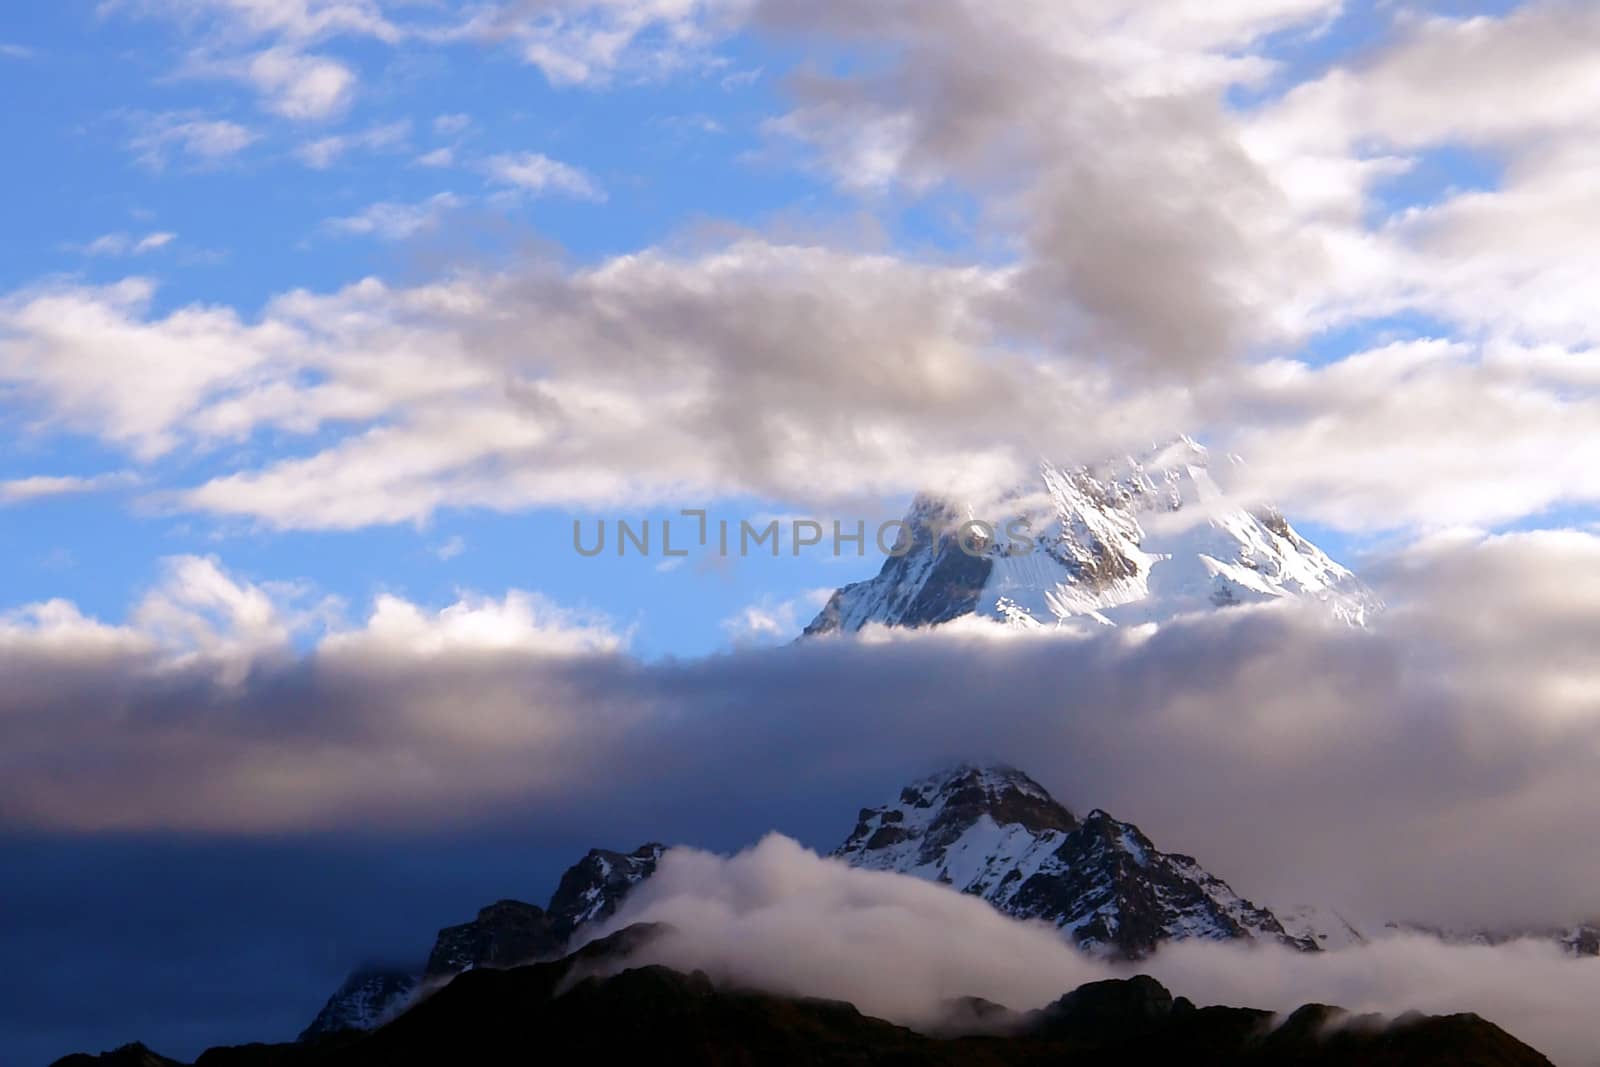 View of annapurna mountain, trek to base camp conservation area by ptxgarfield